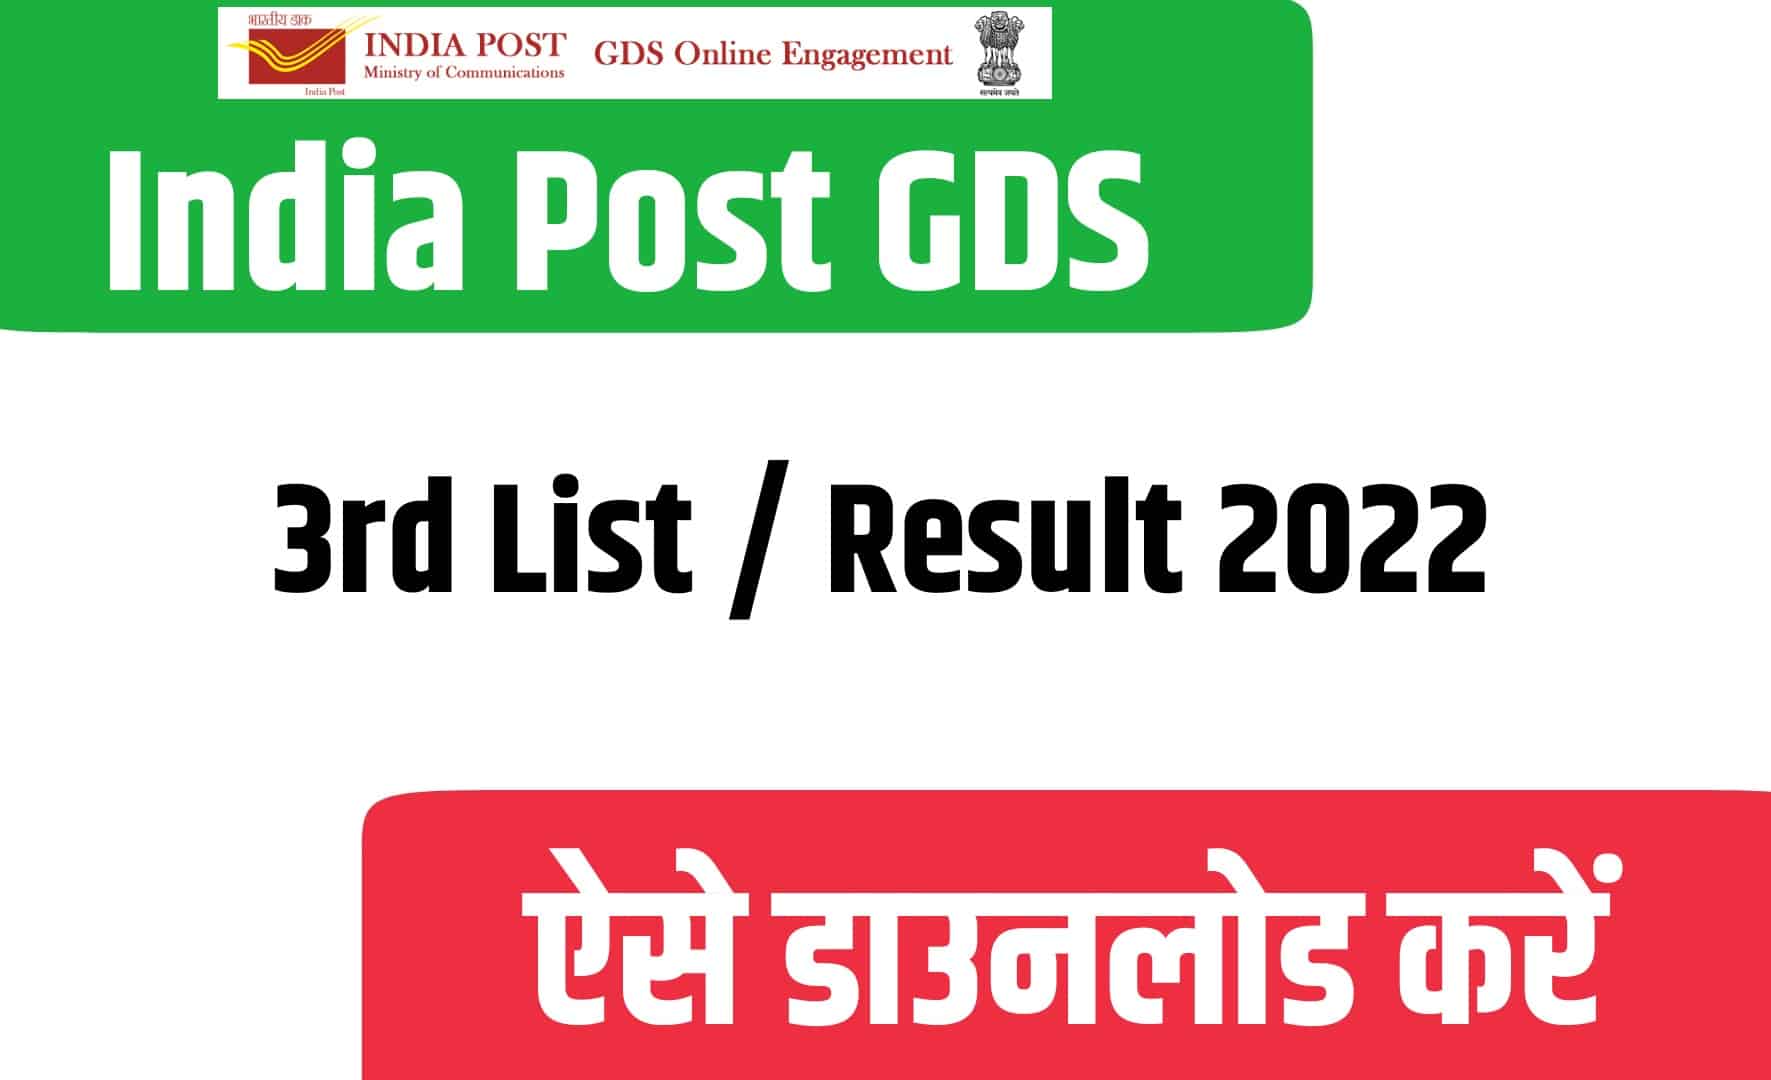 India Post GDS 3rd List / Result 2022 